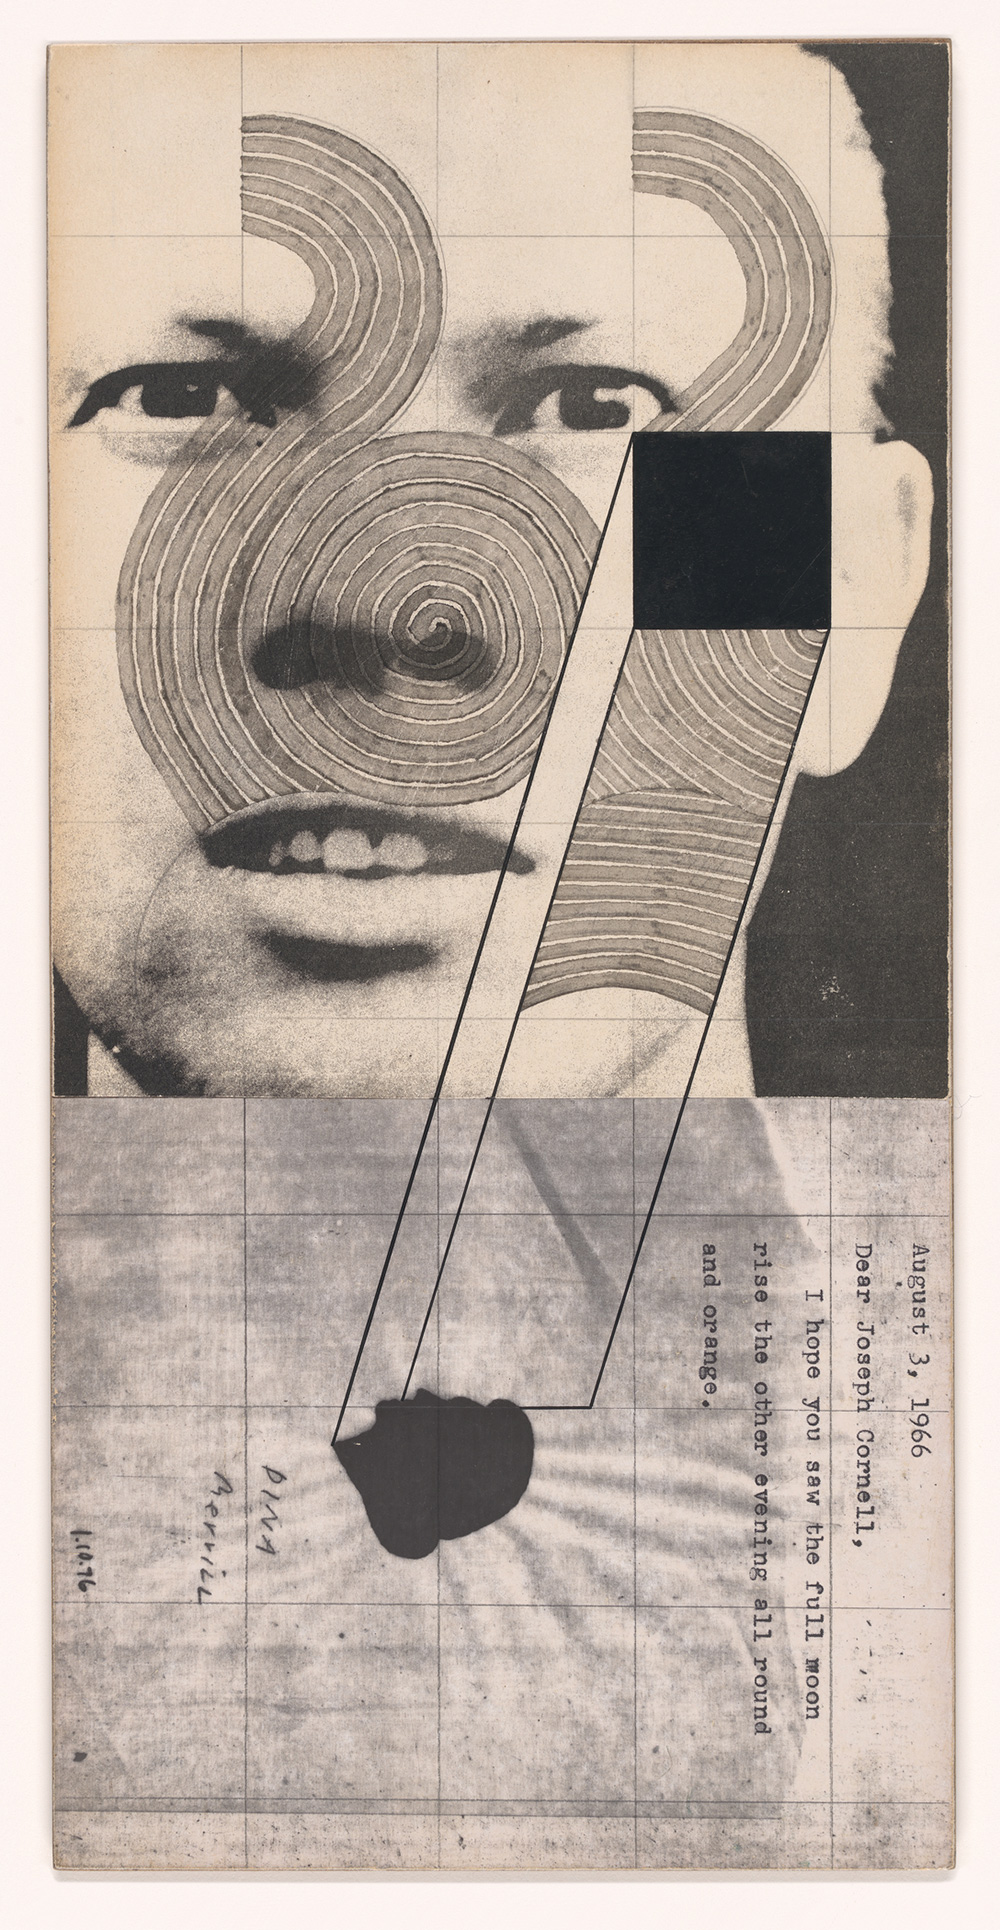 Ray Johnson, Untitled (Ray Johnson with Dina Merrill), 1967/1974/1976; San Francisco Museum of Modern Art, purchase, by exchange, through a fractional gift of Evelyn D. Haas; © Estate of Ray Johnson *